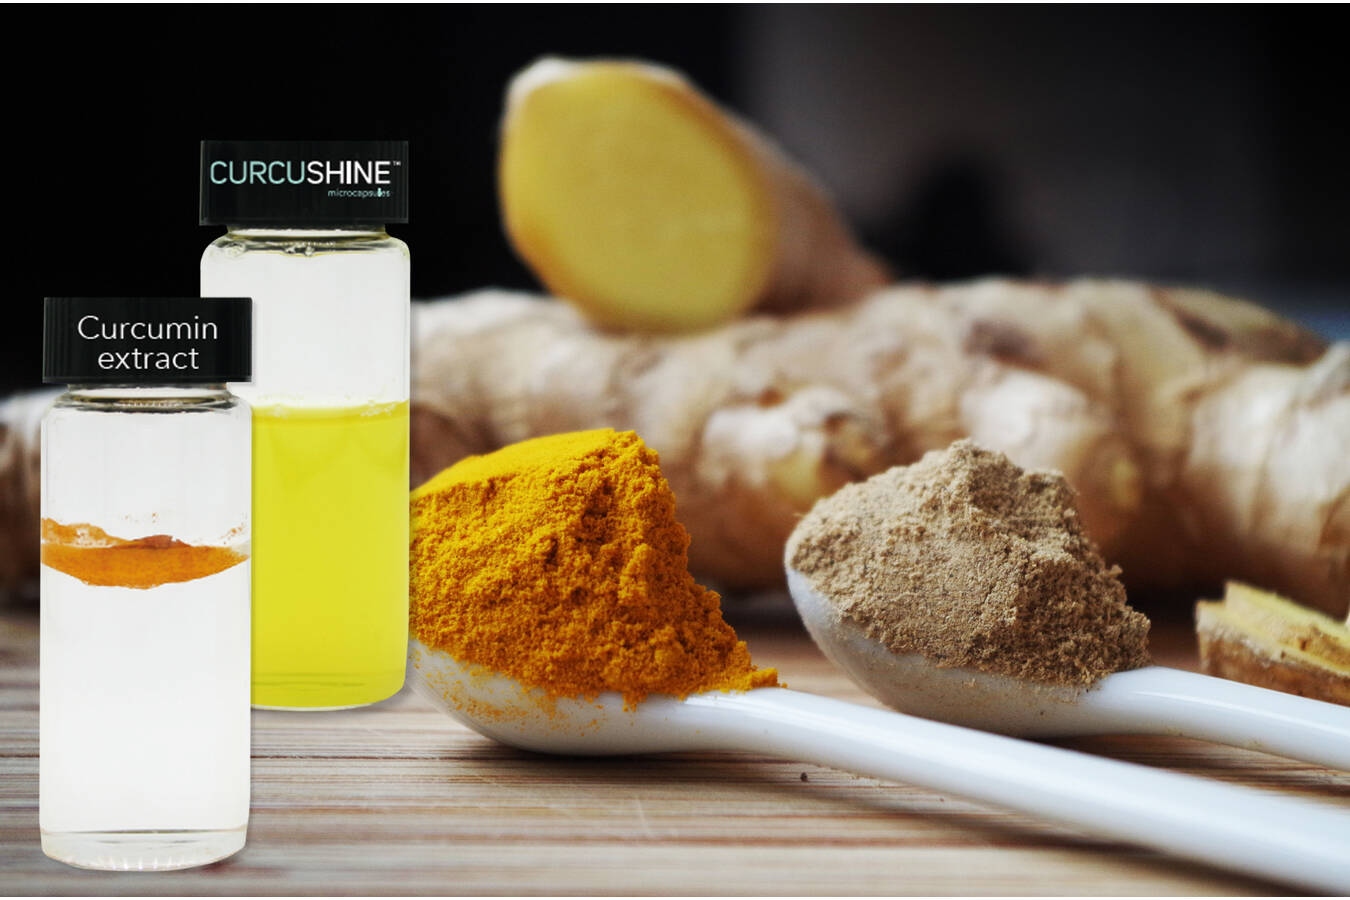 How to Tame Recalcitrant Ingredients like Curcumin with Technological Processes